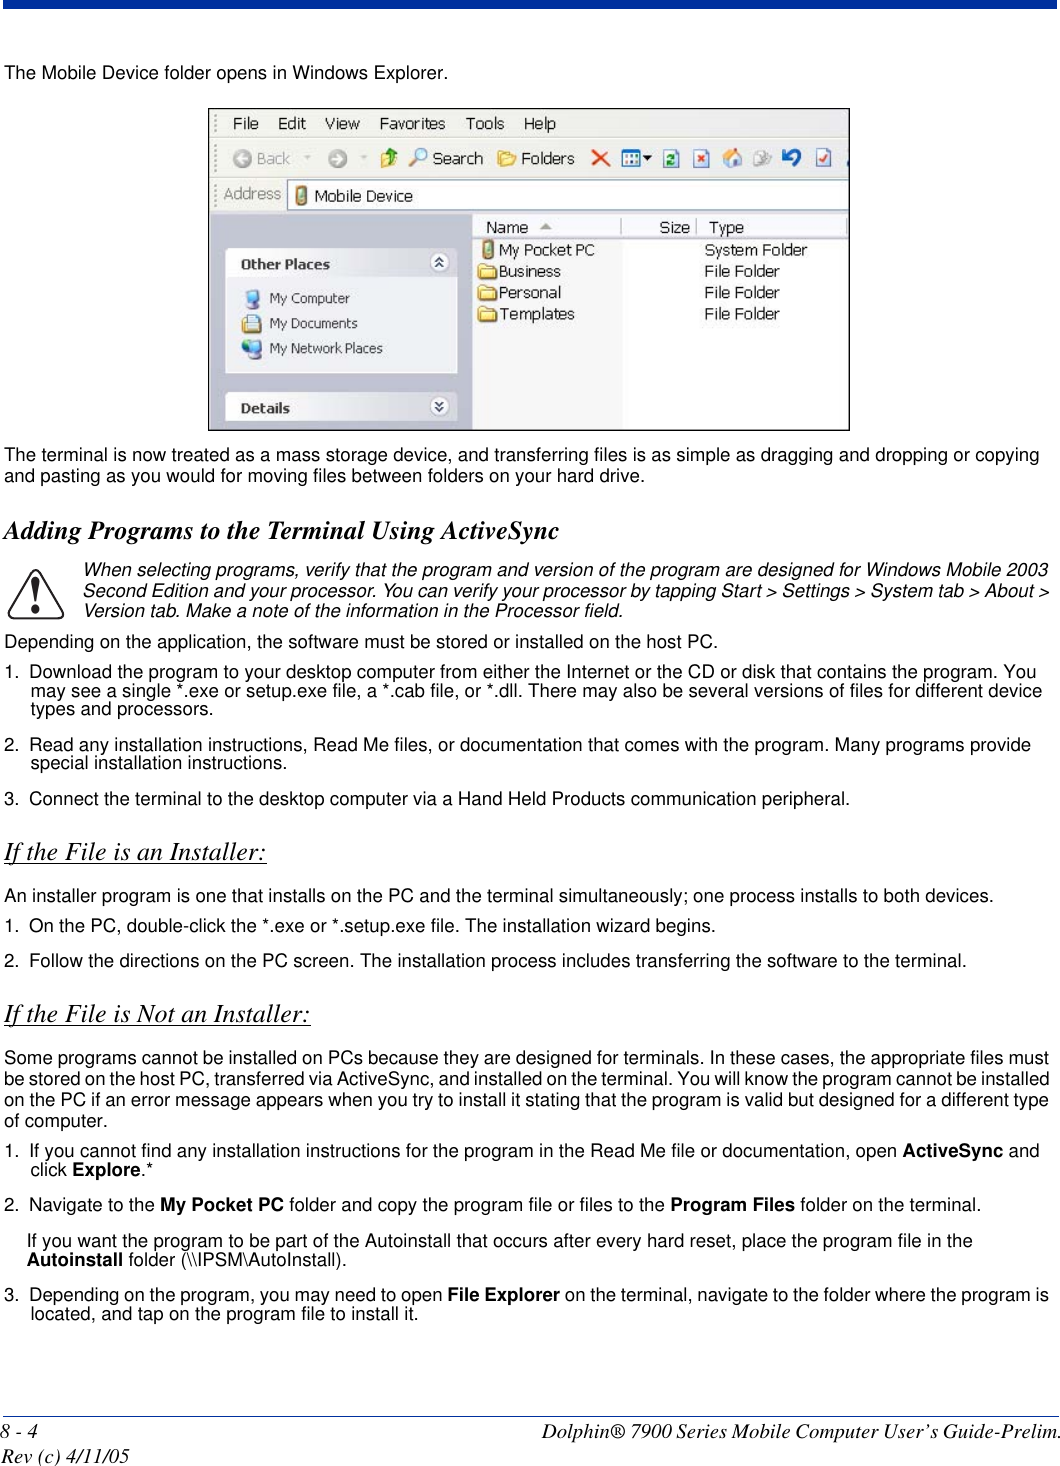 8 - 4 Dolphin® 7900 Series Mobile Computer User’s Guide-Prelim. Rev (c) 4/11/05The Mobile Device folder opens in Windows Explorer. The terminal is now treated as a mass storage device, and transferring files is as simple as dragging and dropping or copying and pasting as you would for moving files between folders on your hard drive.Adding Programs to the Terminal Using ActiveSyncWhen selecting programs, verify that the program and version of the program are designed for Windows Mobile 2003 Second Edition and your processor. You can verify your processor by tapping Start &gt; Settings &gt; System tab &gt; About &gt; Version tab. Make a note of the information in the Processor field. Depending on the application, the software must be stored or installed on the host PC. 1. Download the program to your desktop computer from either the Internet or the CD or disk that contains the program. You may see a single *.exe or setup.exe file, a *.cab file, or *.dll. There may also be several versions of files for different device types and processors.2. Read any installation instructions, Read Me files, or documentation that comes with the program. Many programs provide special installation instructions.3. Connect the terminal to the desktop computer via a Hand Held Products communication peripheral.If the File is an Installer:An installer program is one that installs on the PC and the terminal simultaneously; one process installs to both devices.1. On the PC, double-click the *.exe or *.setup.exe file. The installation wizard begins. 2. Follow the directions on the PC screen. The installation process includes transferring the software to the terminal. If the File is Not an Installer:Some programs cannot be installed on PCs because they are designed for terminals. In these cases, the appropriate files must be stored on the host PC, transferred via ActiveSync, and installed on the terminal. You will know the program cannot be installed on the PC if an error message appears when you try to install it stating that the program is valid but designed for a different type of computer. 1. If you cannot find any installation instructions for the program in the Read Me file or documentation, open ActiveSync and click Explore.*2. Navigate to the My Pocket PC folder and copy the program file or files to the Program Files folder on the terminal. If you want the program to be part of the Autoinstall that occurs after every hard reset, place the program file in the Autoinstall folder (\\IPSM\AutoInstall).3. Depending on the program, you may need to open File Explorer on the terminal, navigate to the folder where the program is located, and tap on the program file to install it.!